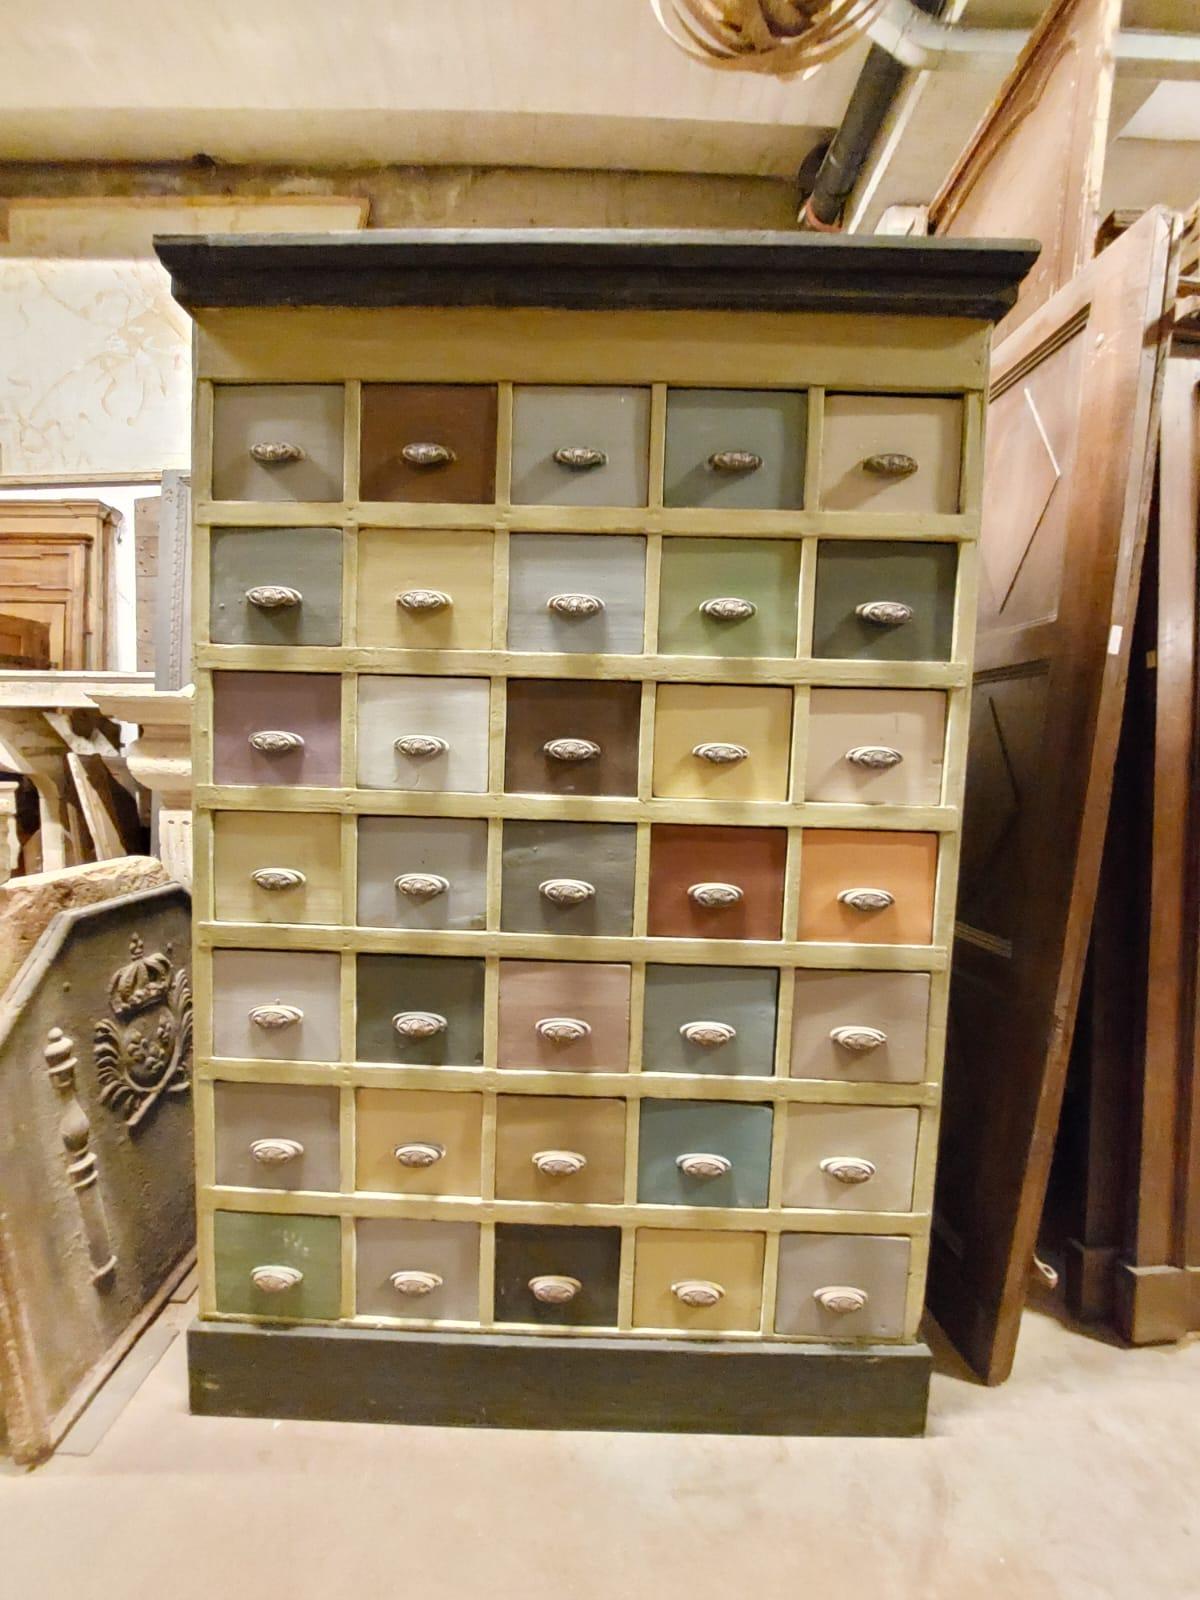 Lacquered Vintage Chest of Drawers in Painted Wood from Old Shop, 19th Century, Italy For Sale